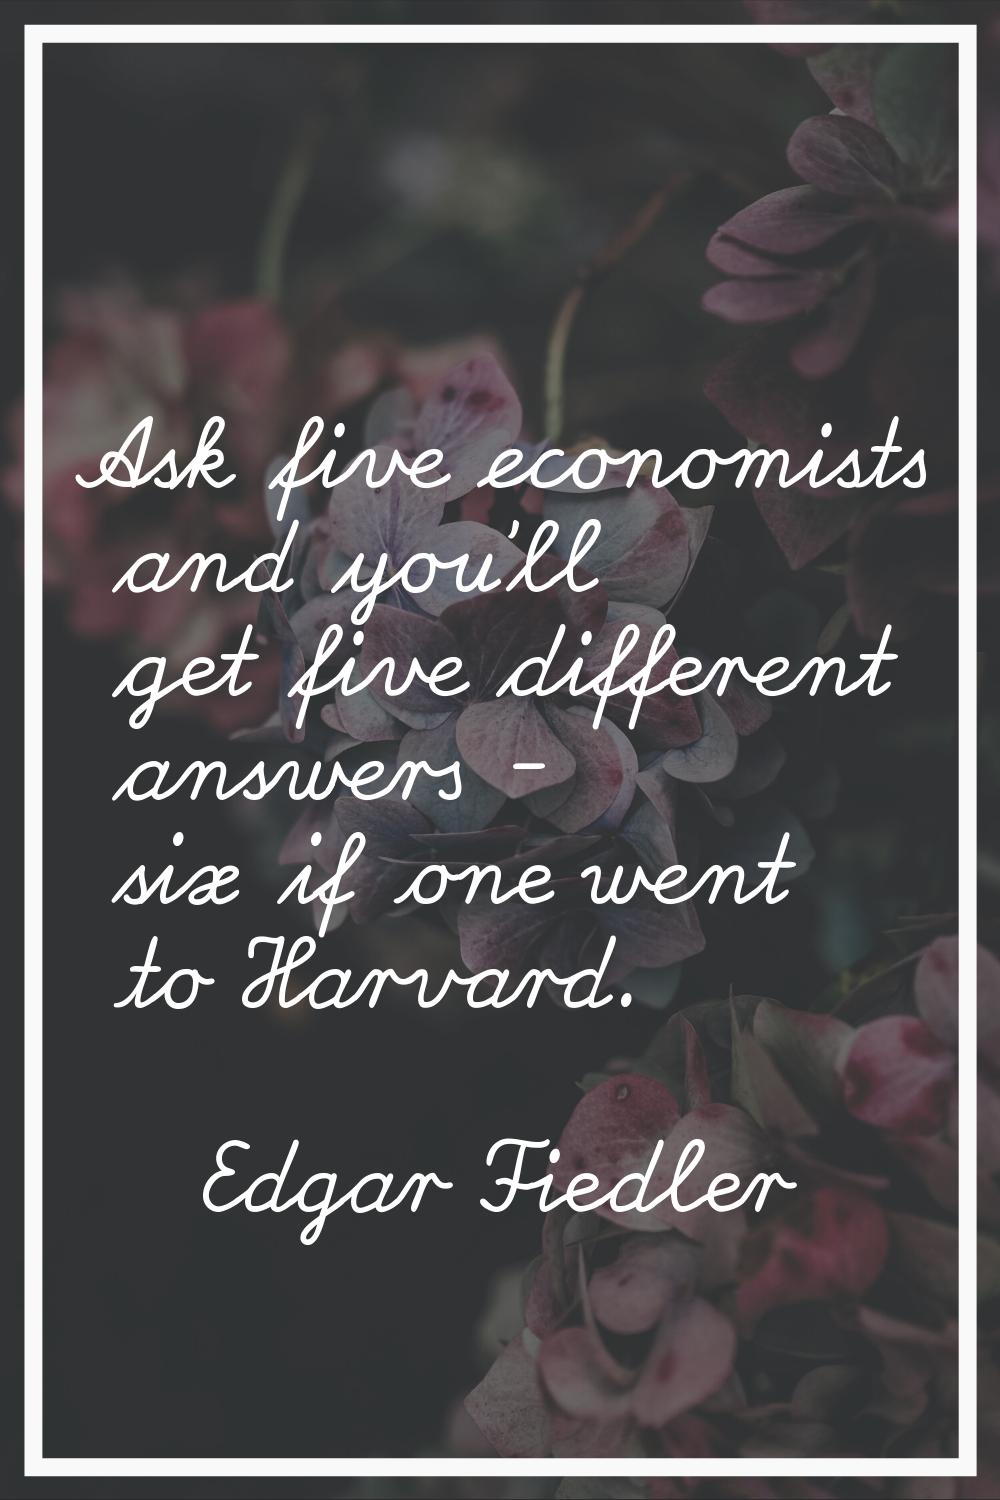 Ask five economists and you'll get five different answers - six if one went to Harvard.